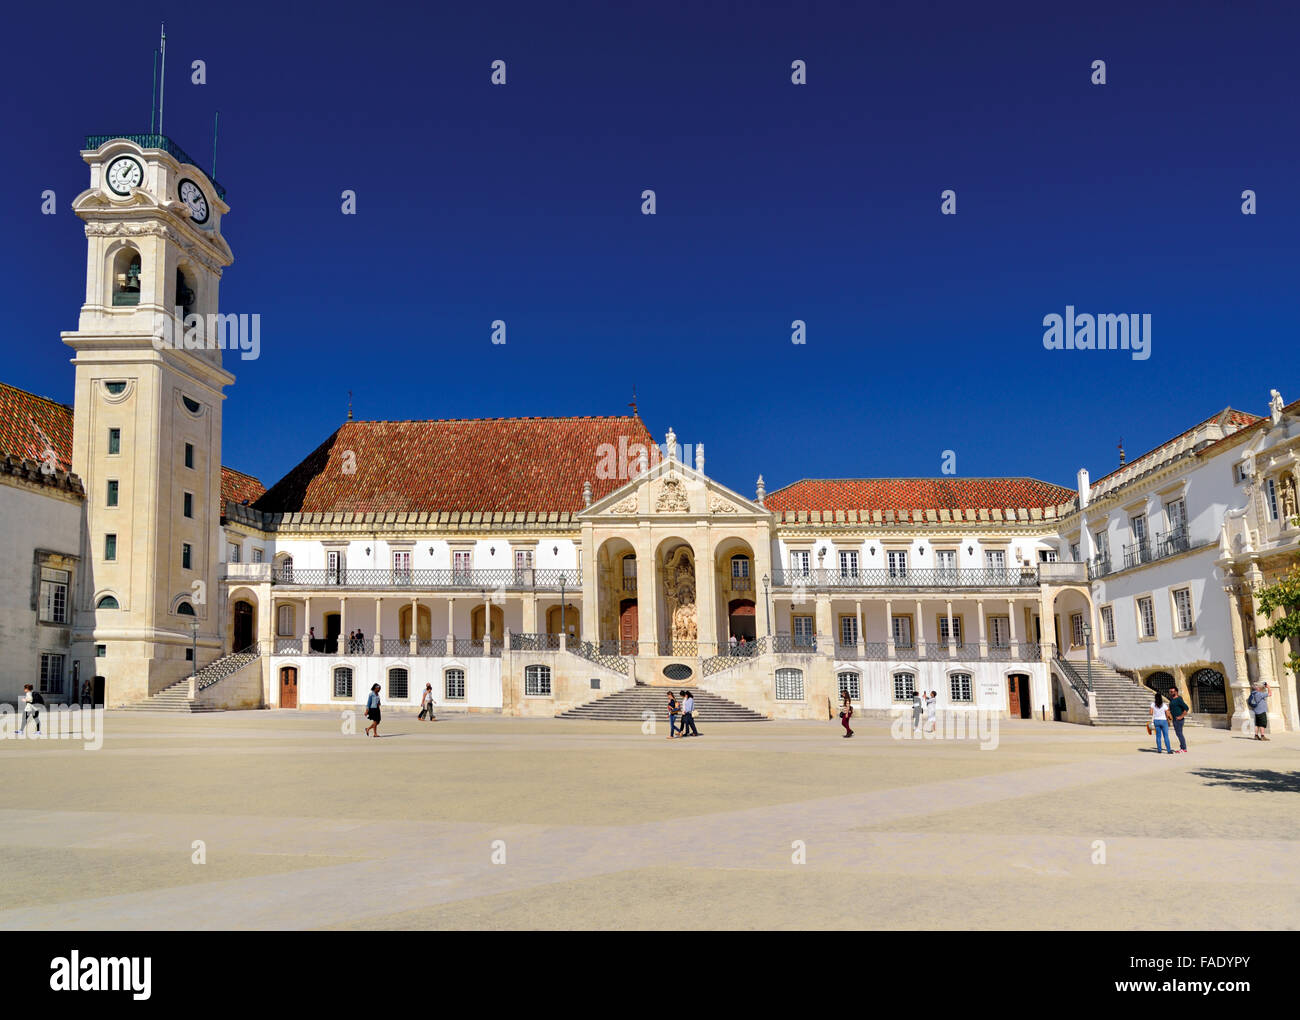 Portugal: Patio with Via Latina and bell tower of the University of Coimbra Stock Photo